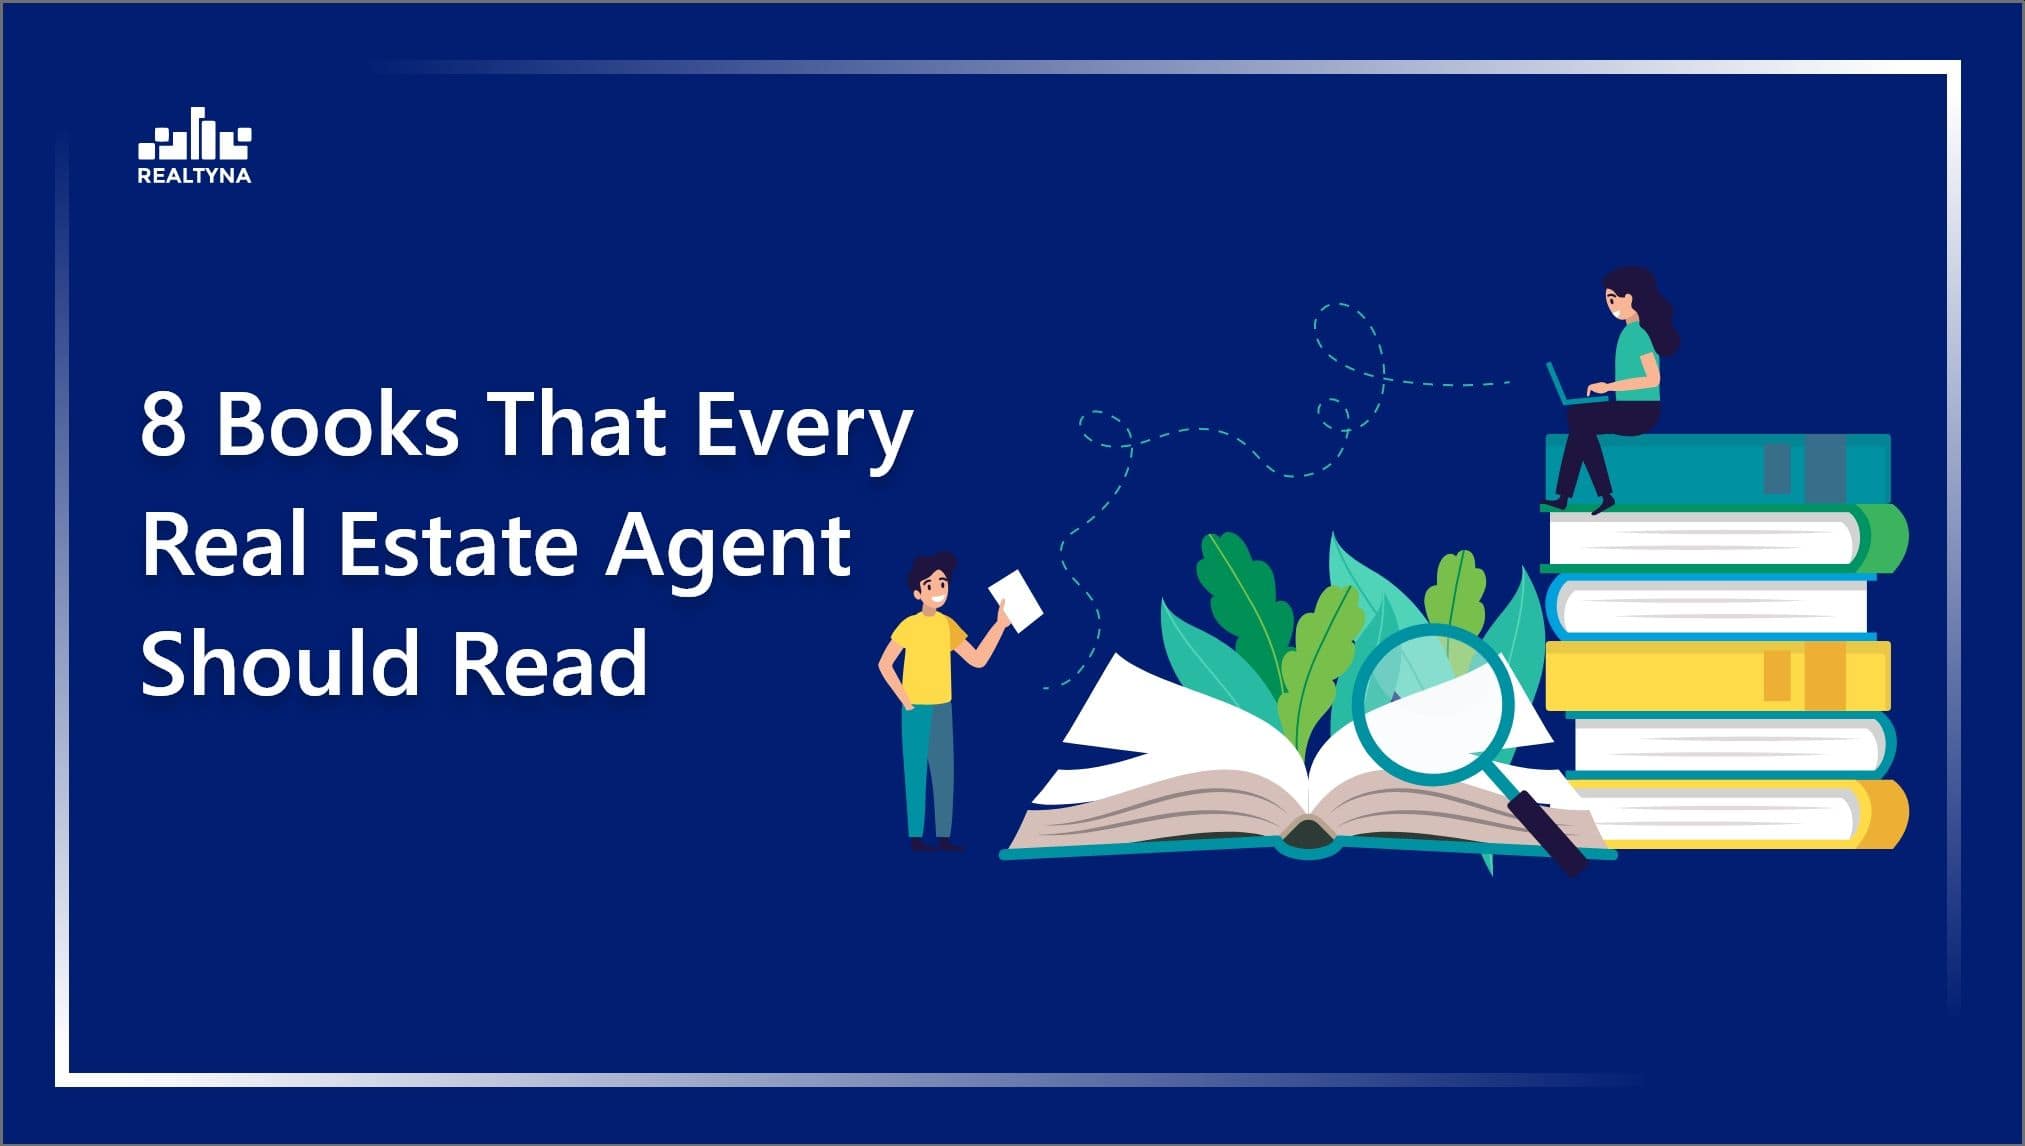 Books for Real Estate Agents